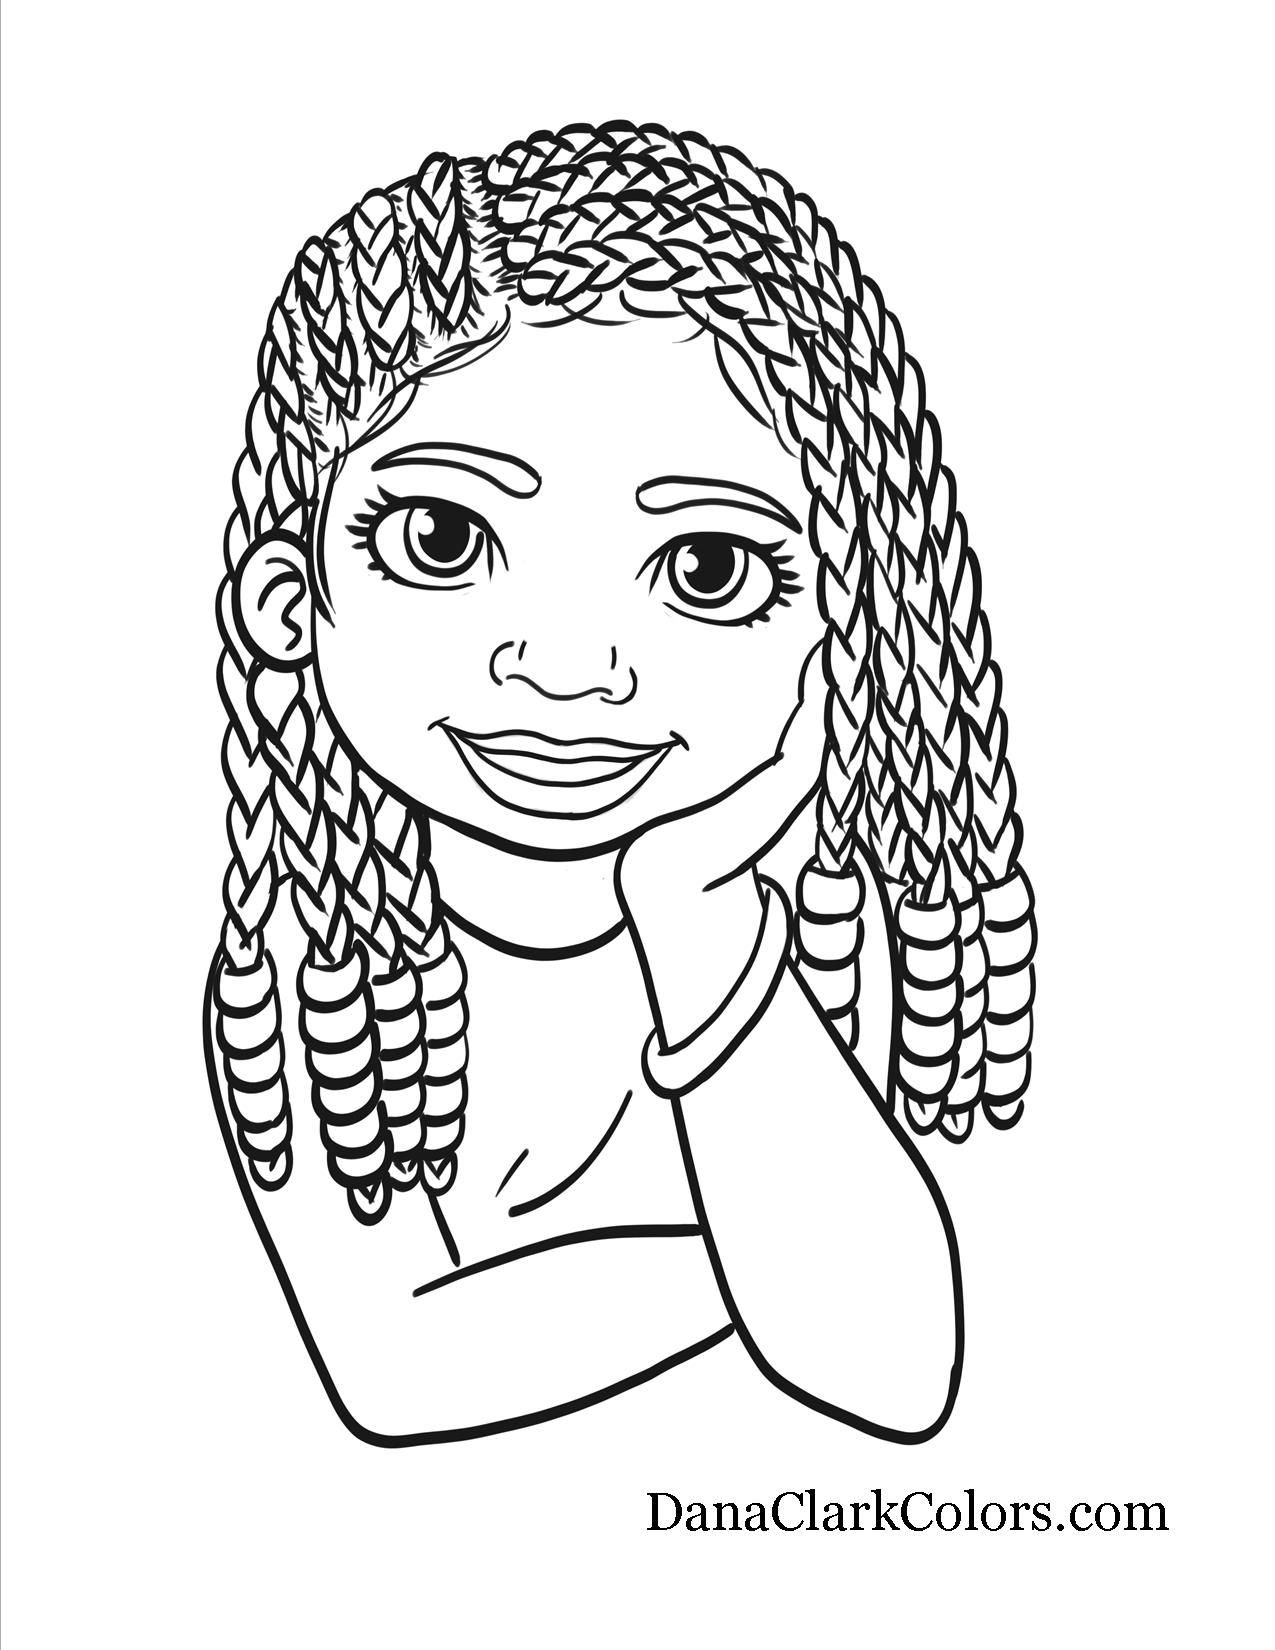 Black Girls Coloring Pages
 Black Kids coloring page AfricanAmericanColoringPage